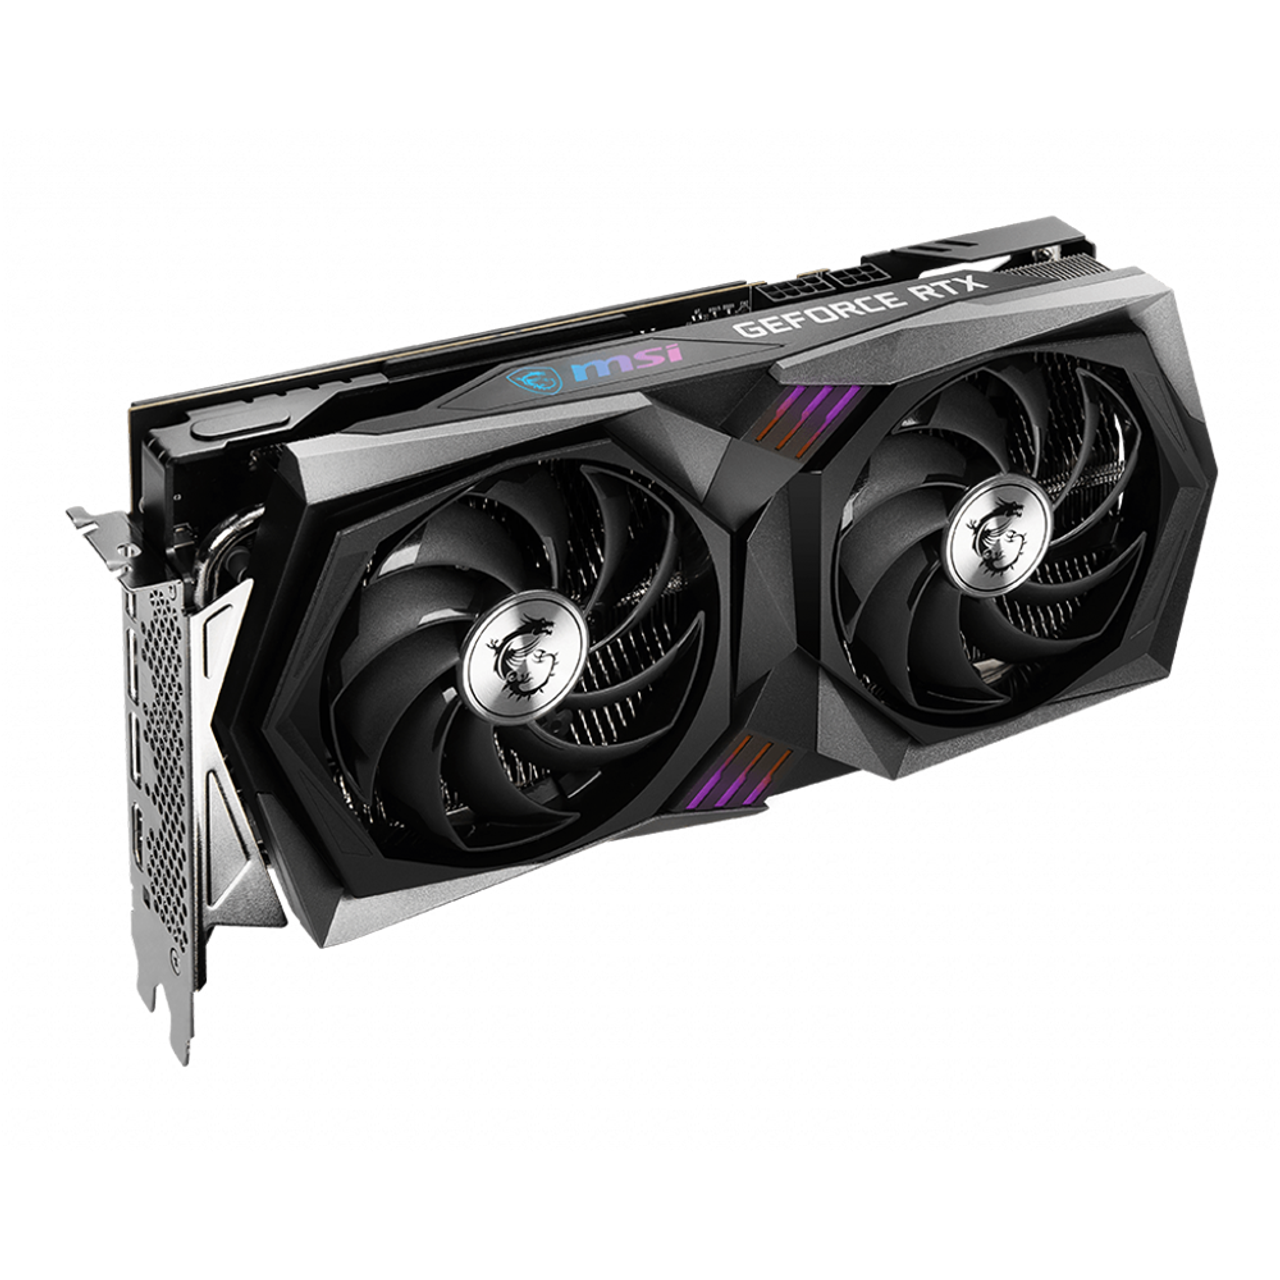 MSI RTX 3060 Gaming X 12G Gaming GeForce RTX 3060 12GB 15 Gbps GDRR6 Twin-Frozr Torx Fan Ampere RGB OC Graphics Card (Limited supply, All sales are final)